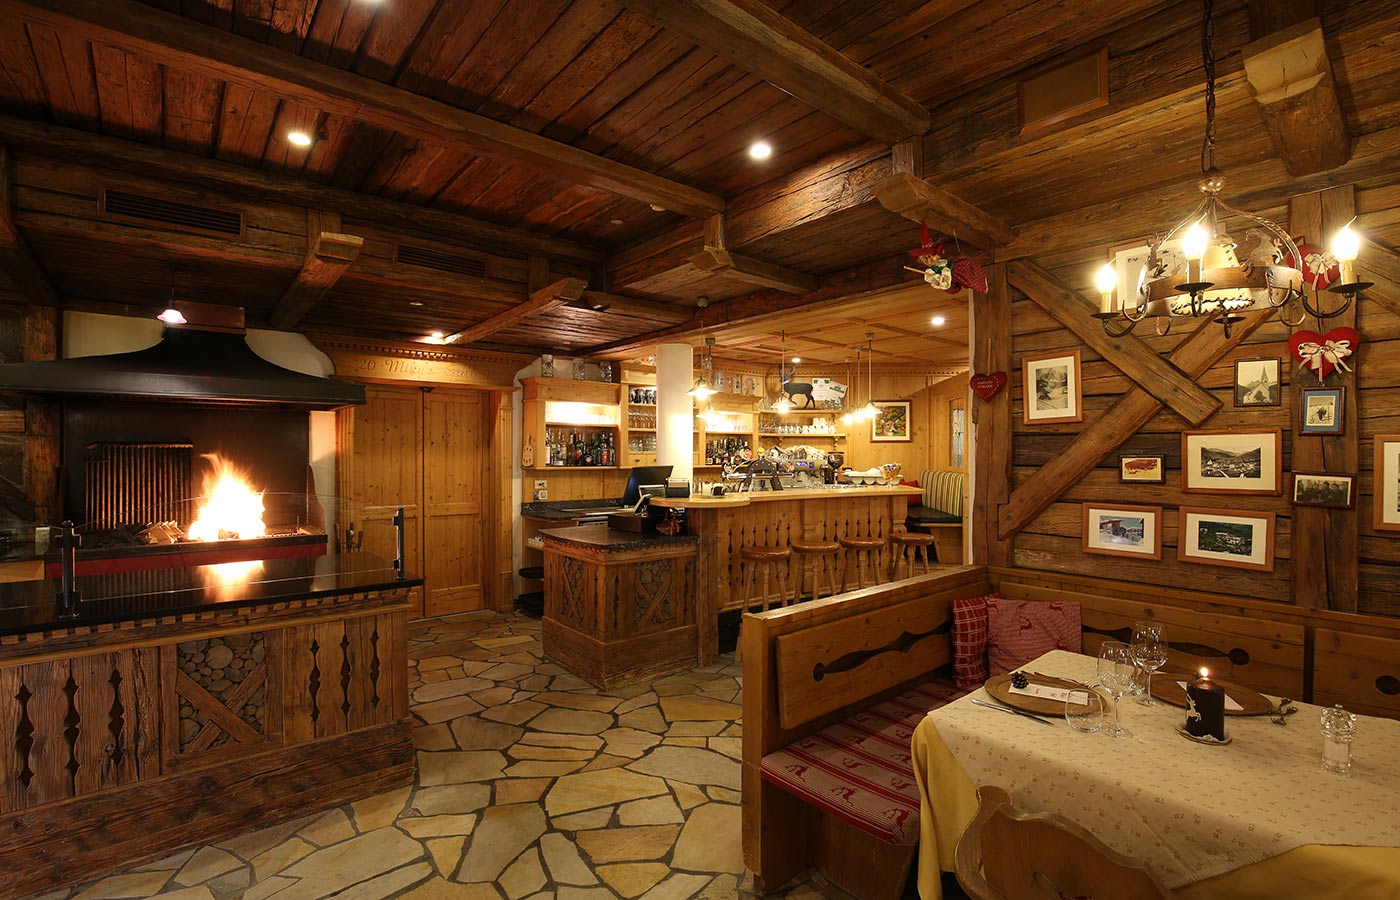 Interior of the restaurant Miky's Grill, entirely decorated in wood with oven on